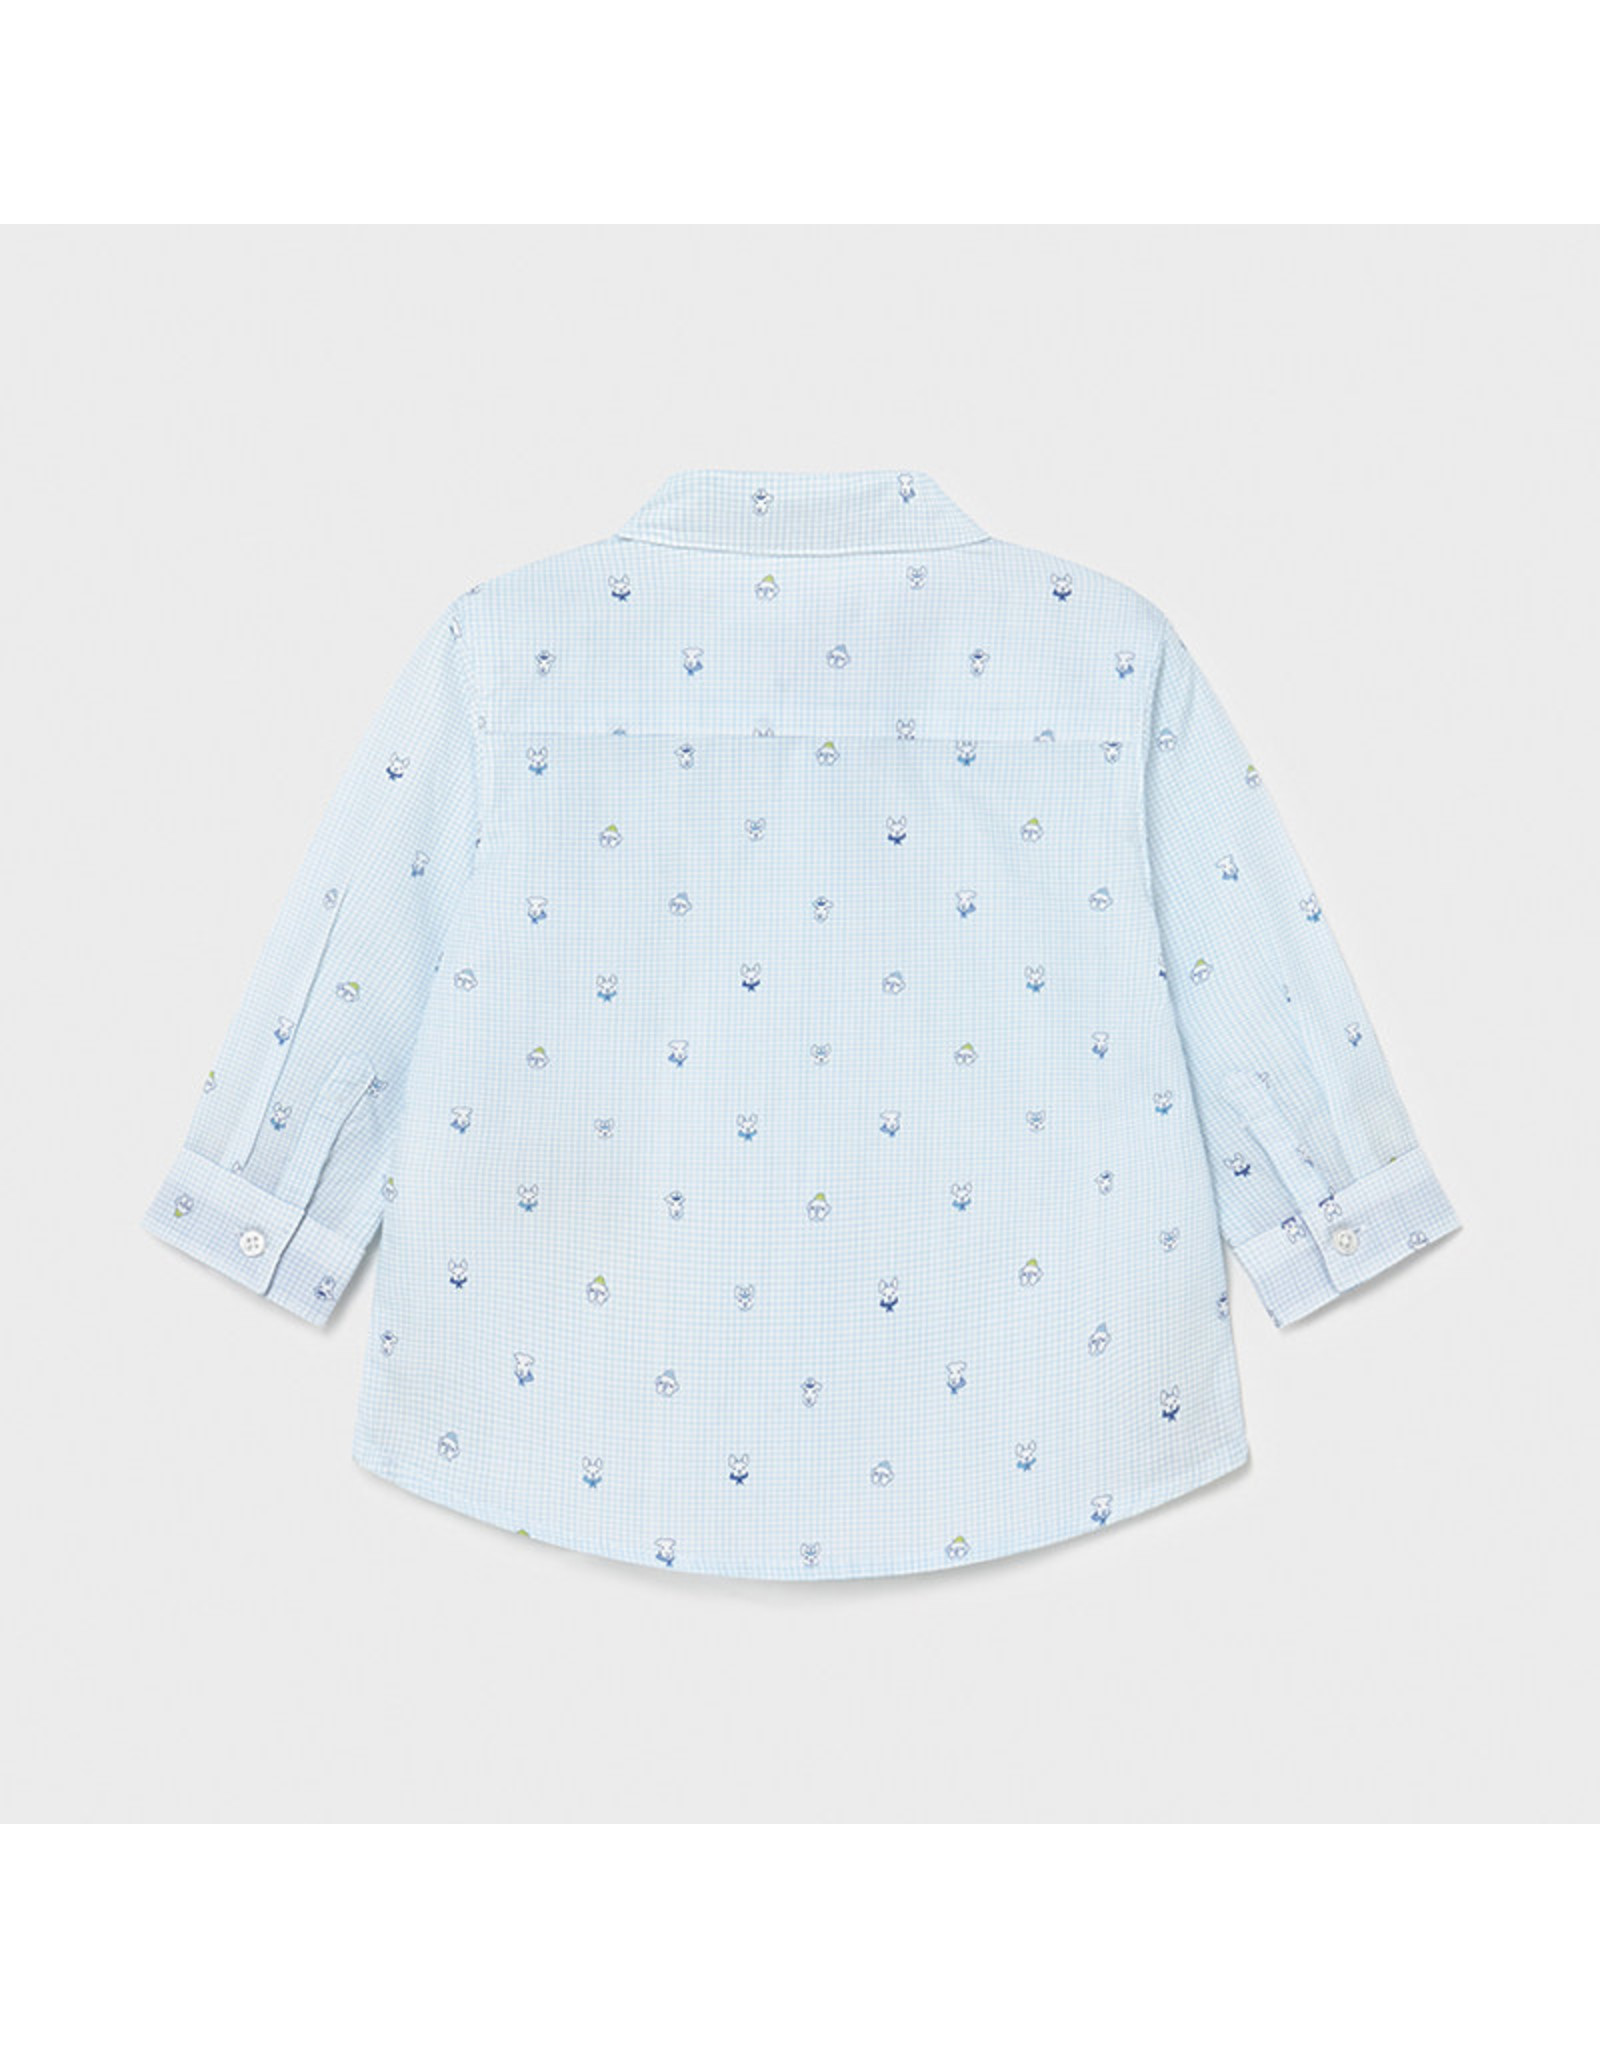 Mayoral Long Sleeve Button Up Shirt